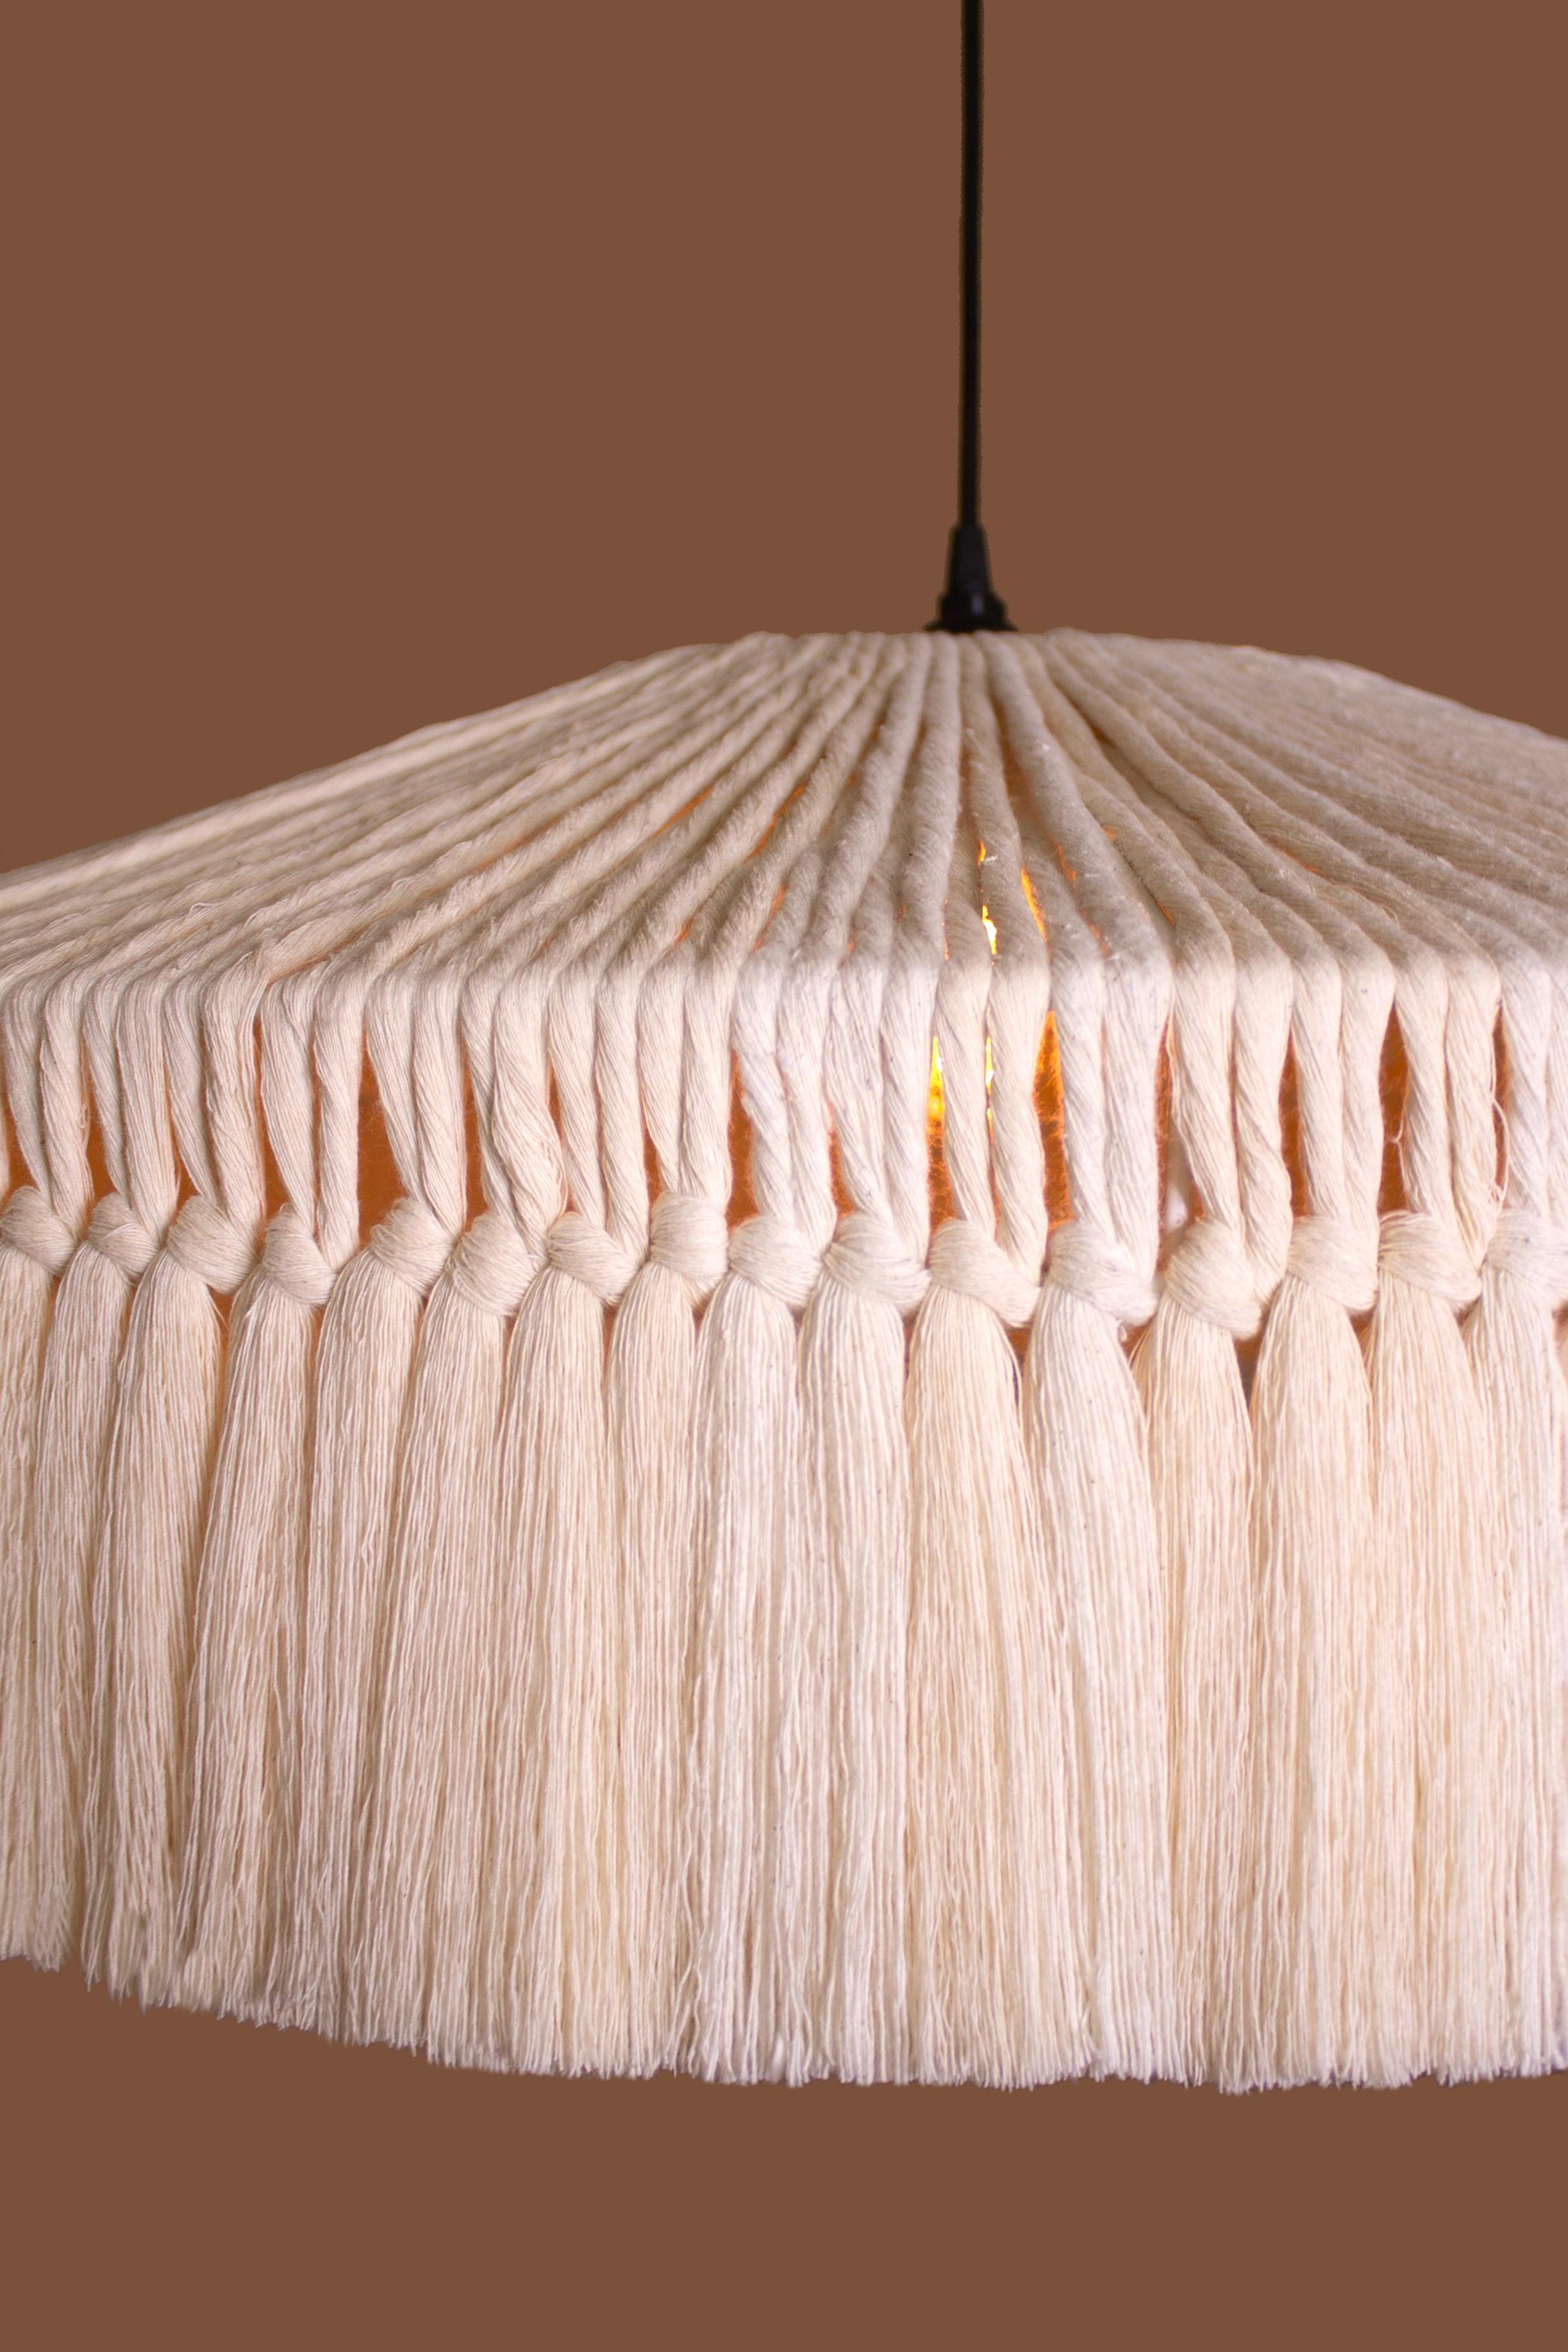 Hand-Woven Handwoven Combed Cotton Bali  Lamp by León León For Sale